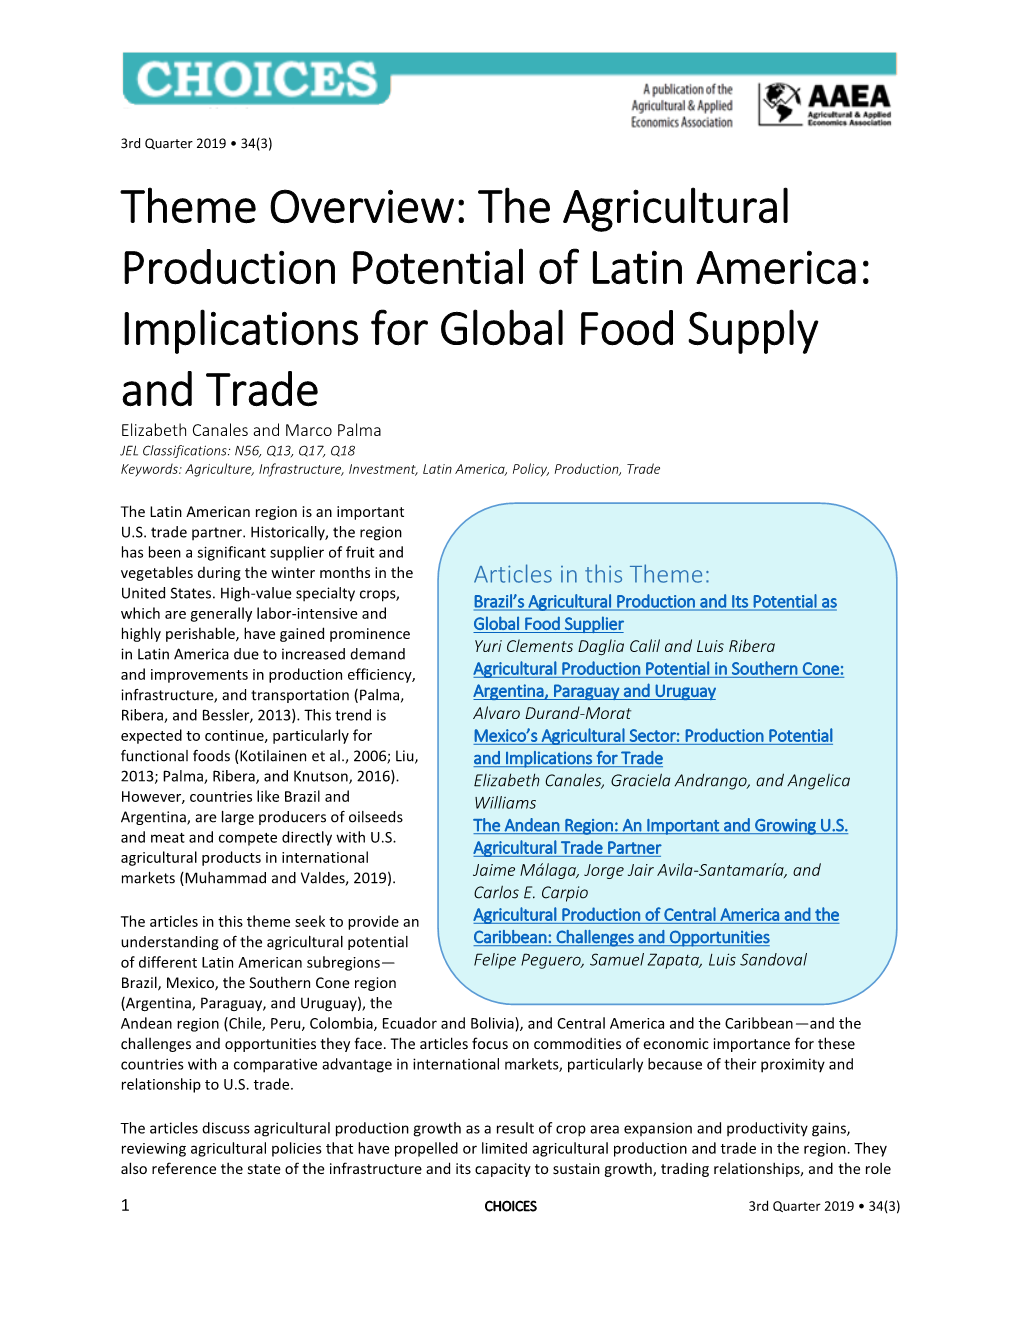 Theme Overview: the Agricultural Production Potential of Latin America: Implications for Global Food Supply and Trade